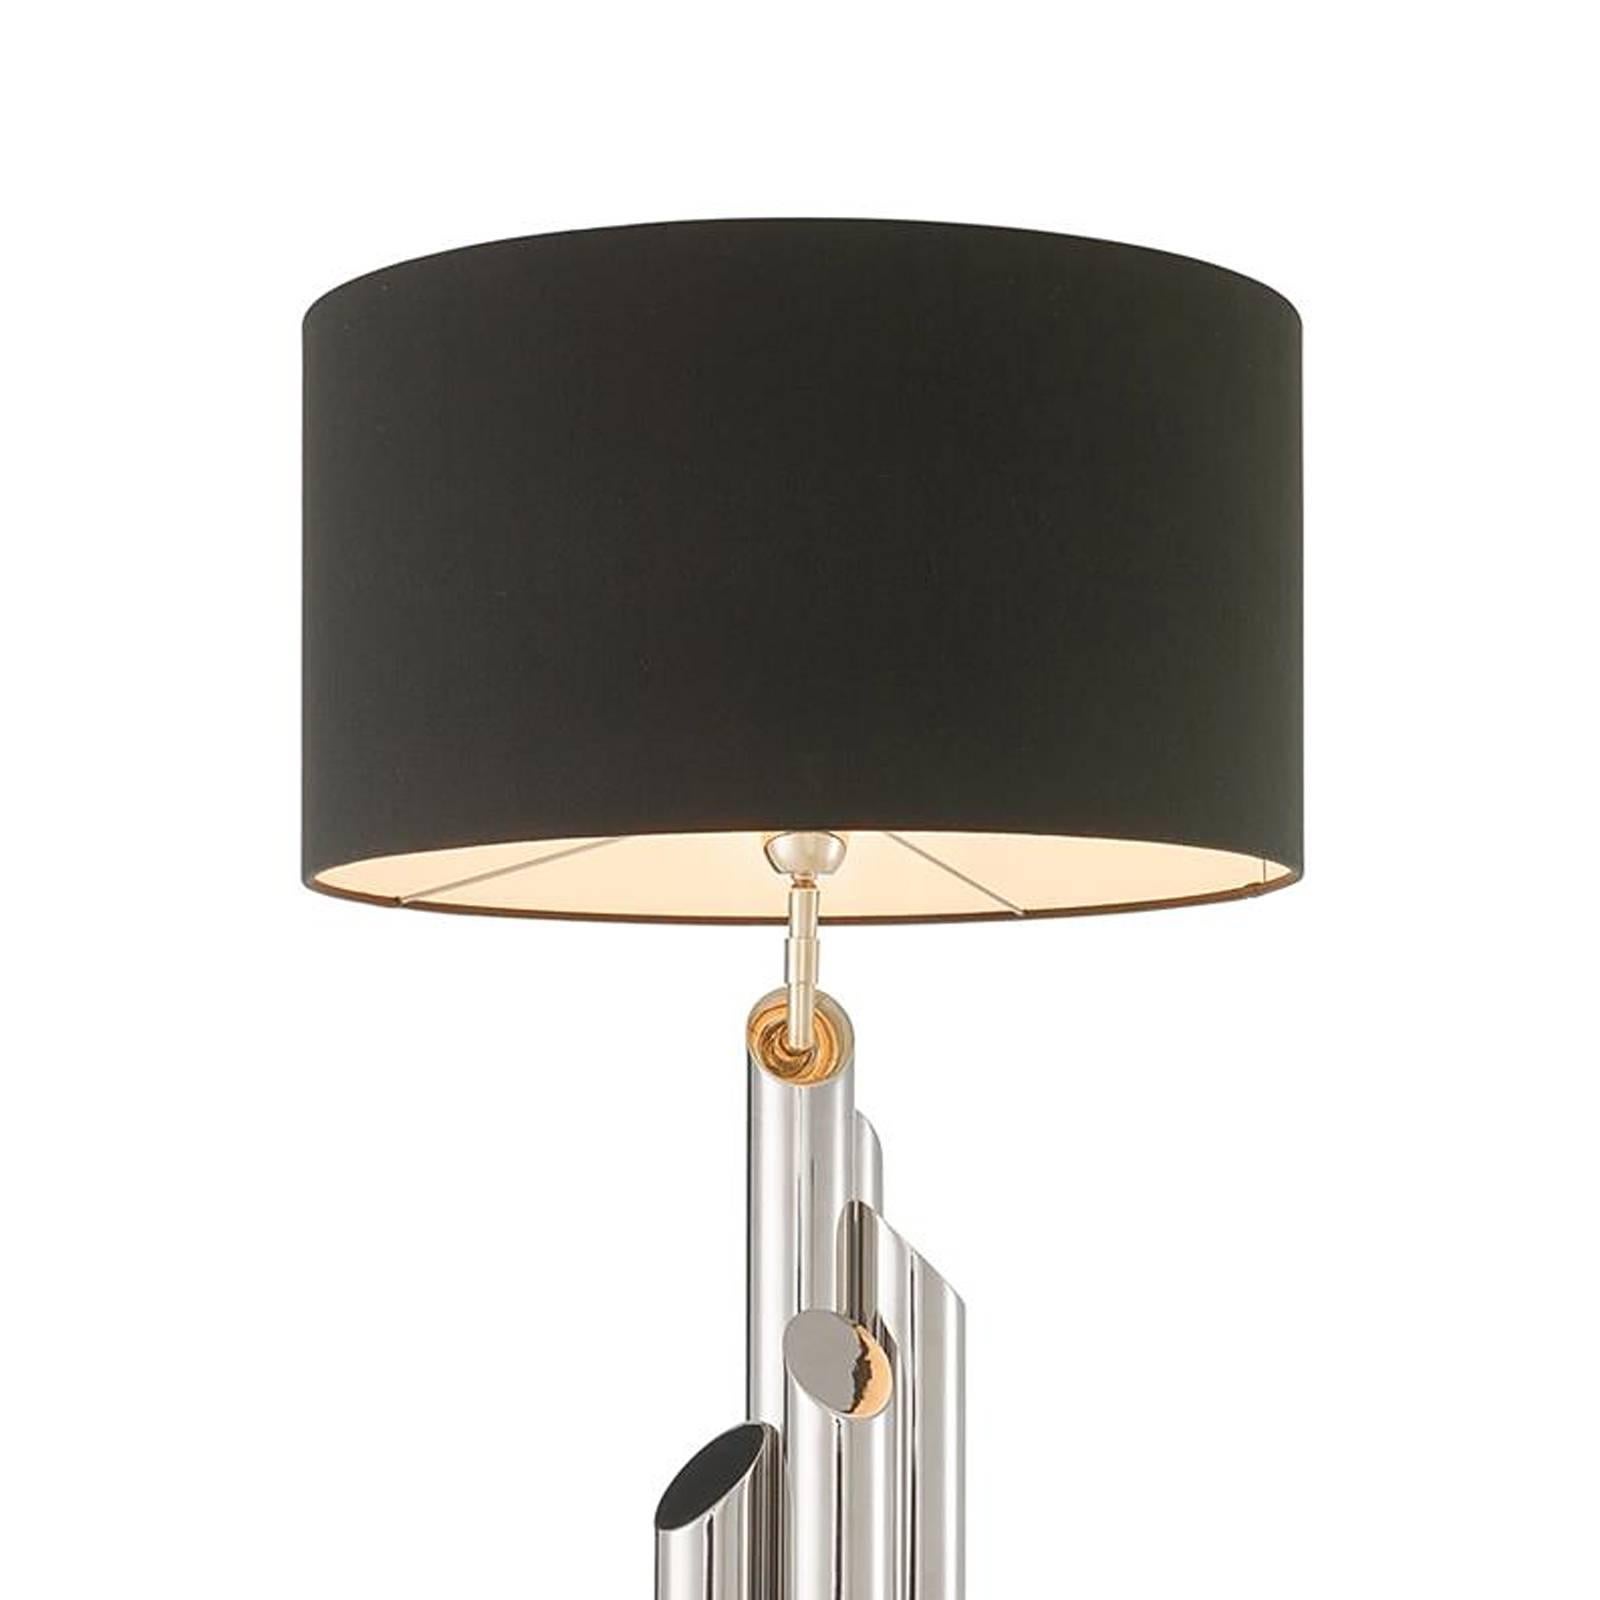 Chinese Tubes Nickel Table Lamp in Nickel Finish on Crystal Glass Base